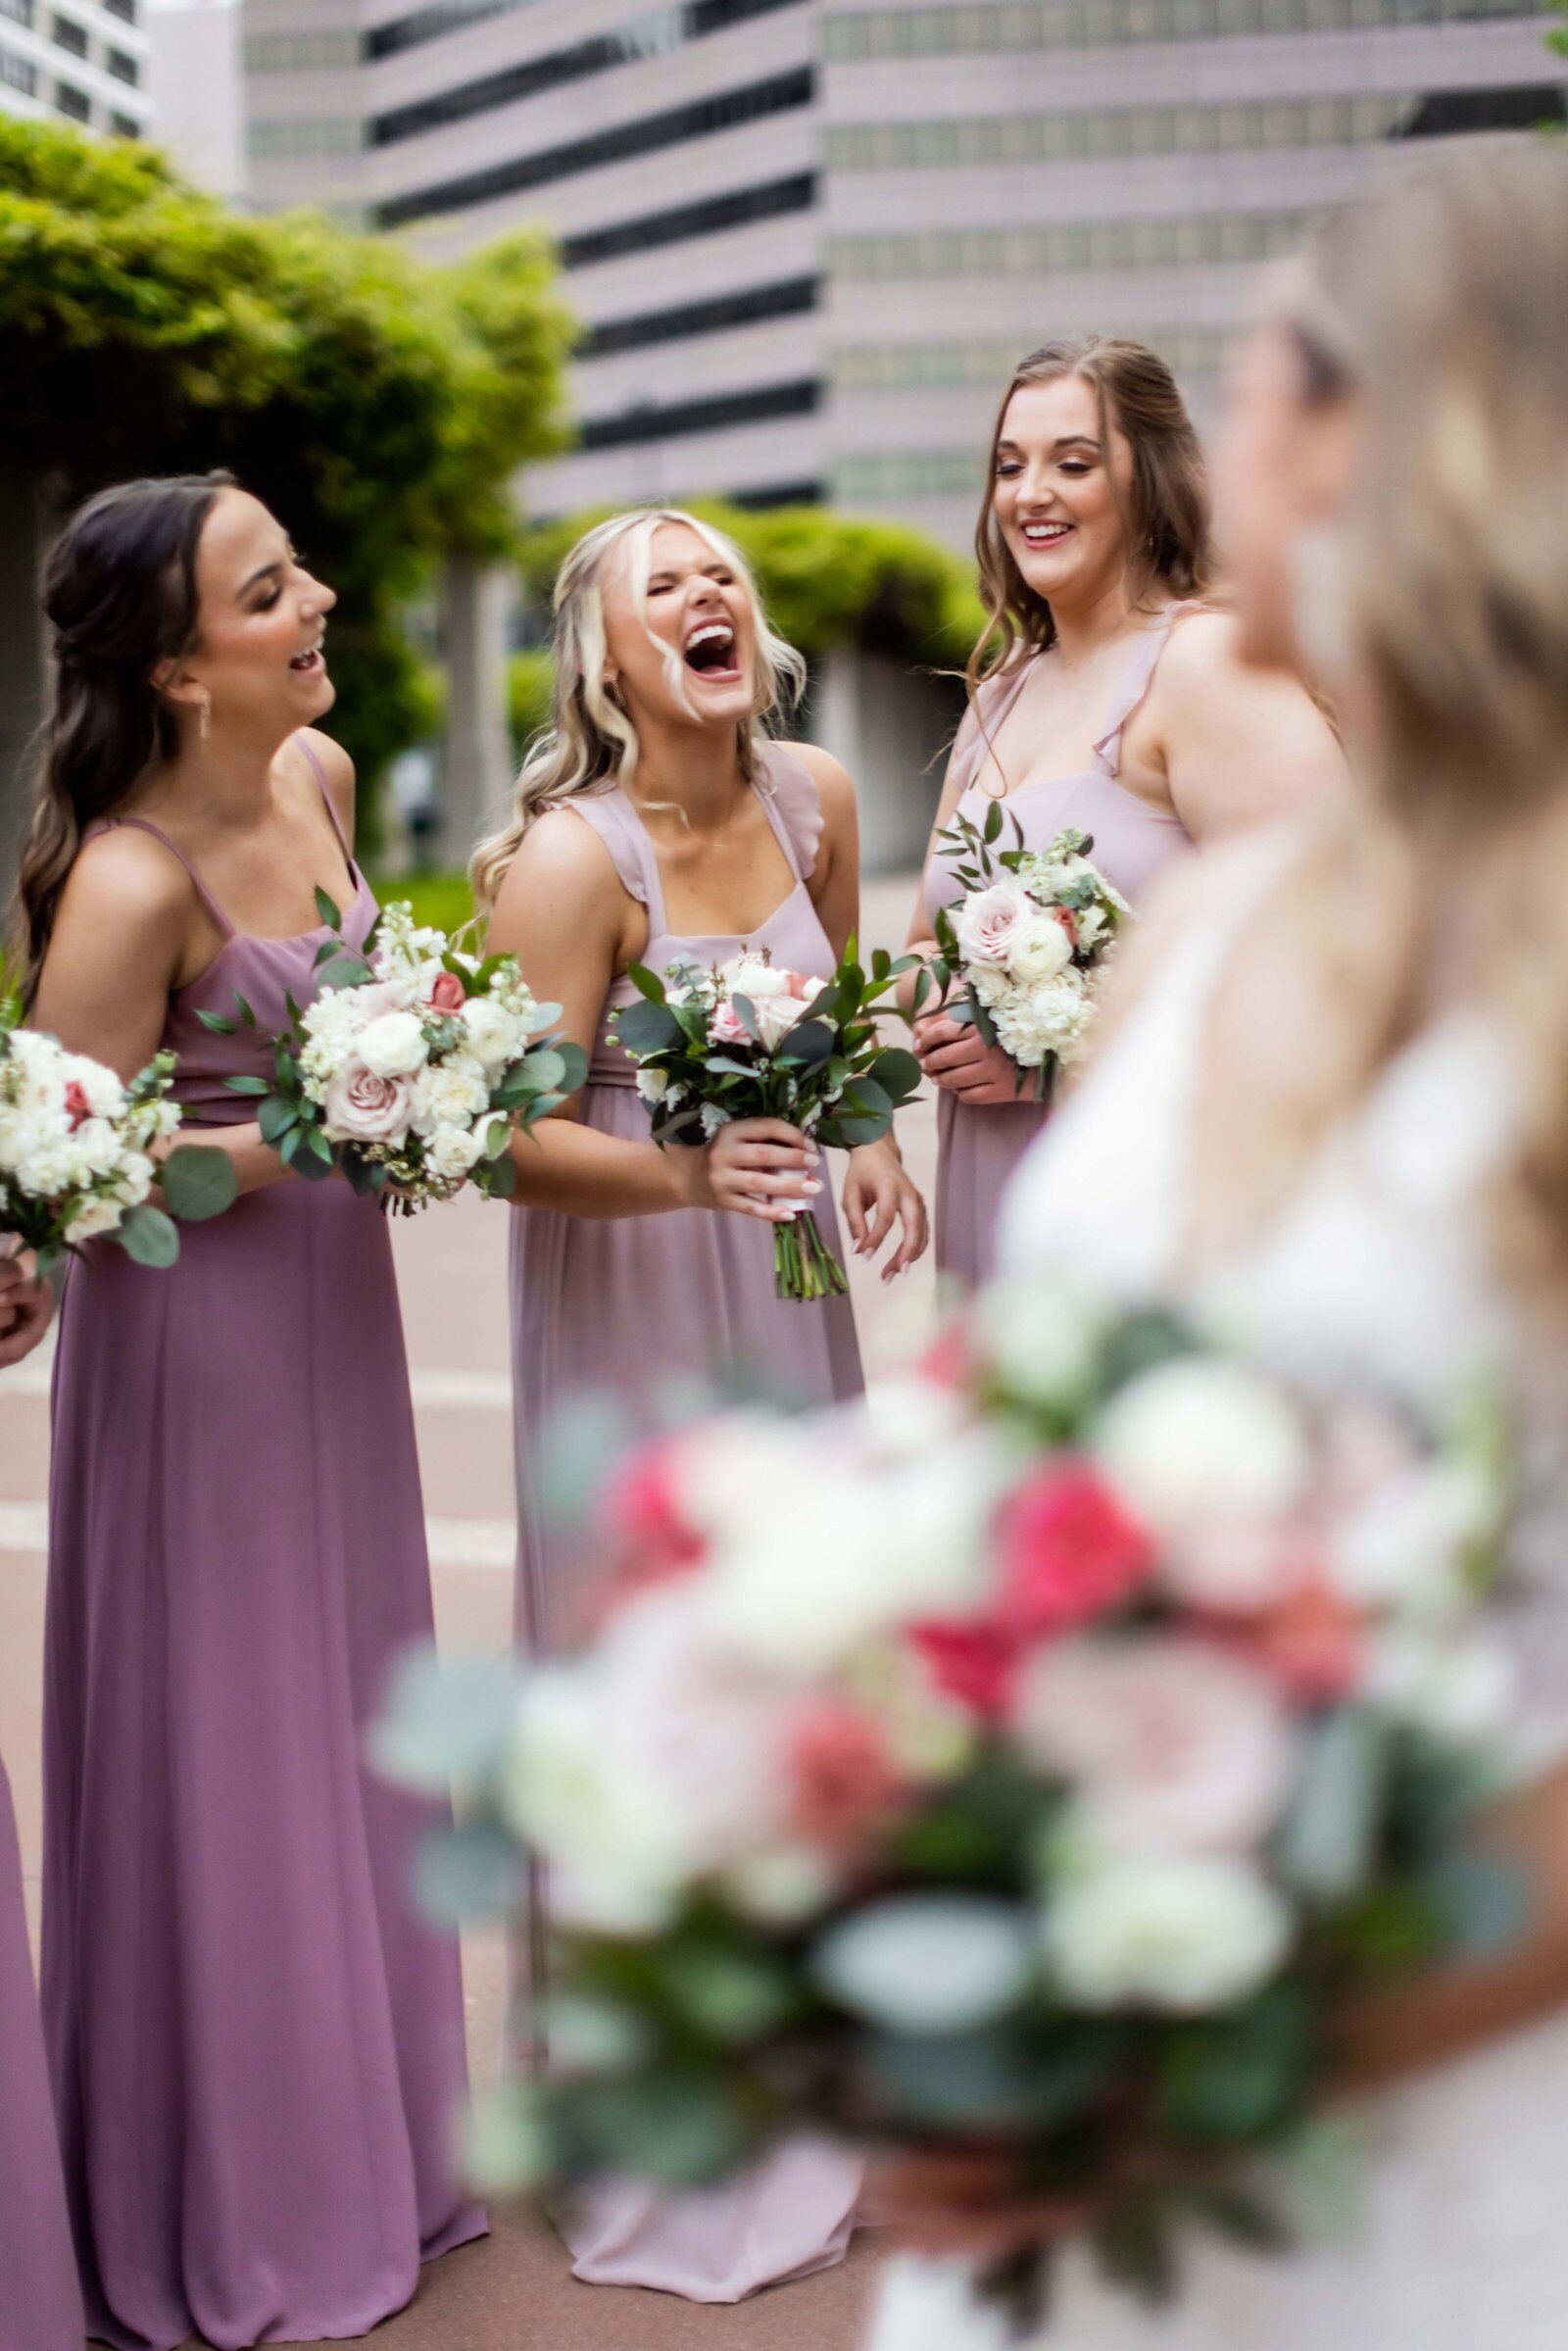 Witness the heartwarming camaraderie and support as this group of laughing bridesmaids surrounds the bride with both hype and grace. Captured in a moment of genuine happiness, this photograph showcases the essential role of bridesmaids in uplifting and celebrating the bride on her special day. Perfect for future brides looking for inspiration on creating a joyful and supportive bridal party atmosphere, this image highlights the power of friendship and laughter in making wedding day memories unforgettable.